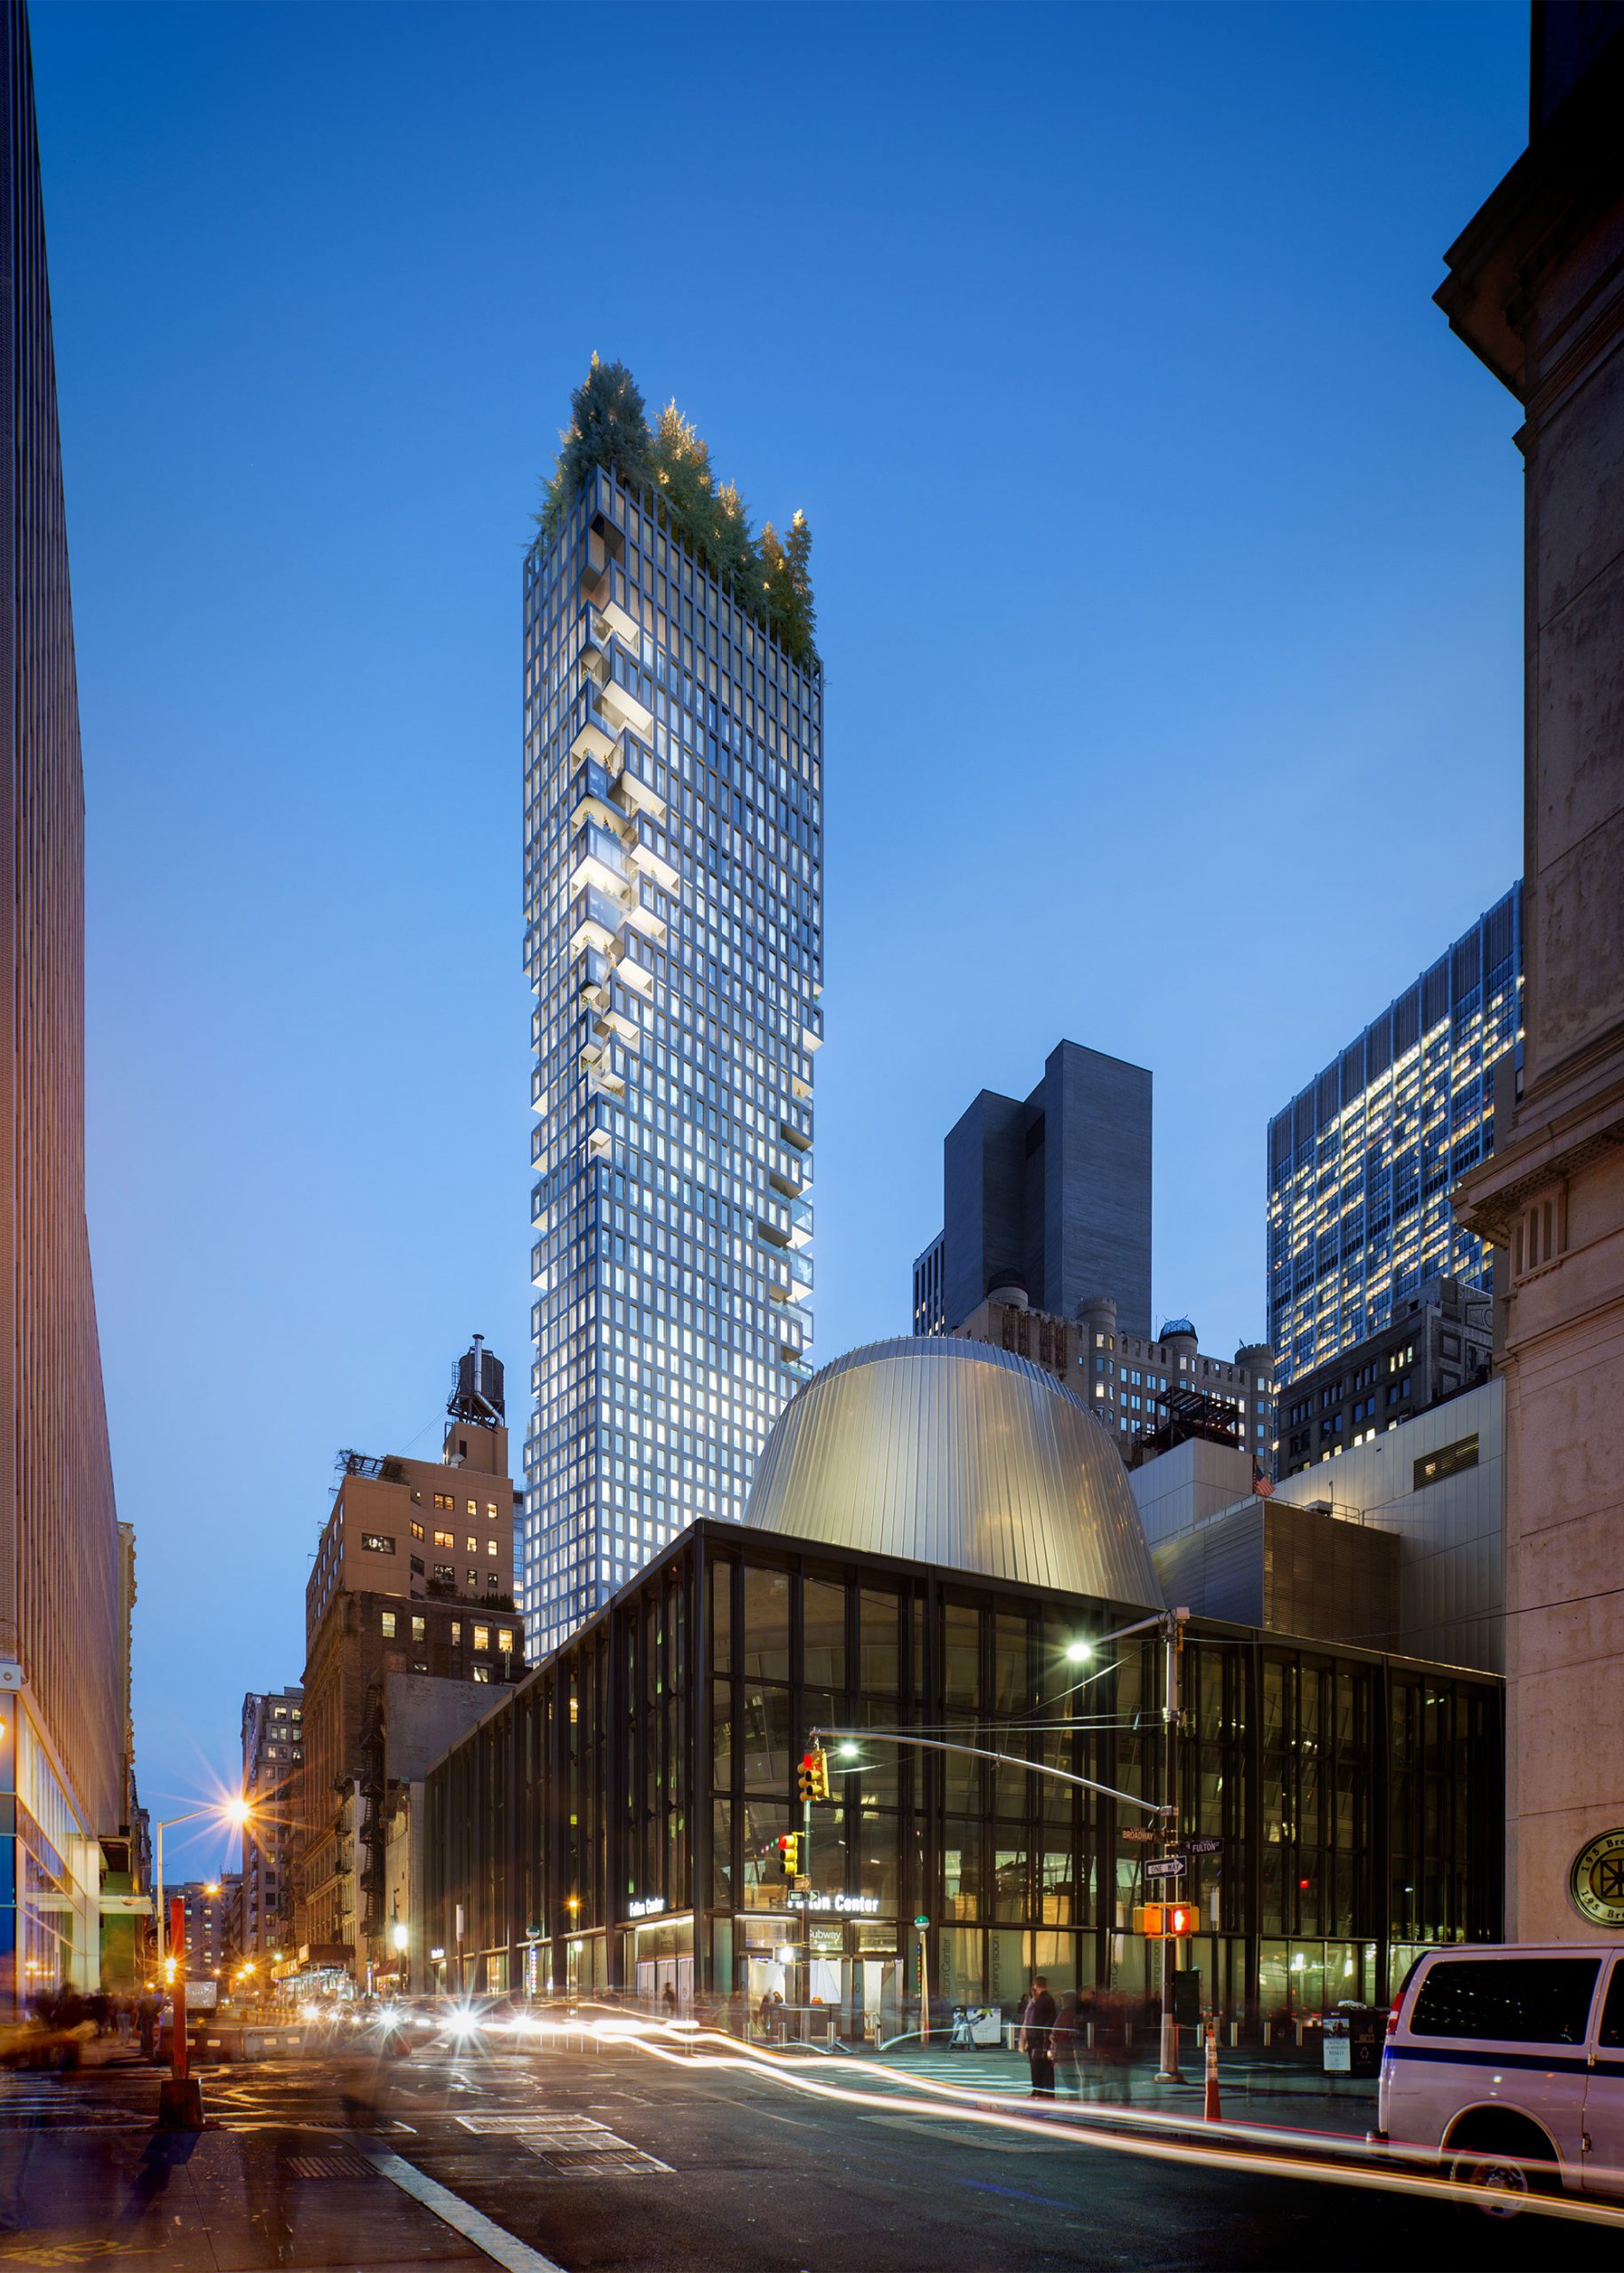 Architectural Rendering of the exterior of the 75 Nassau Street project located in the Financial District, New York City